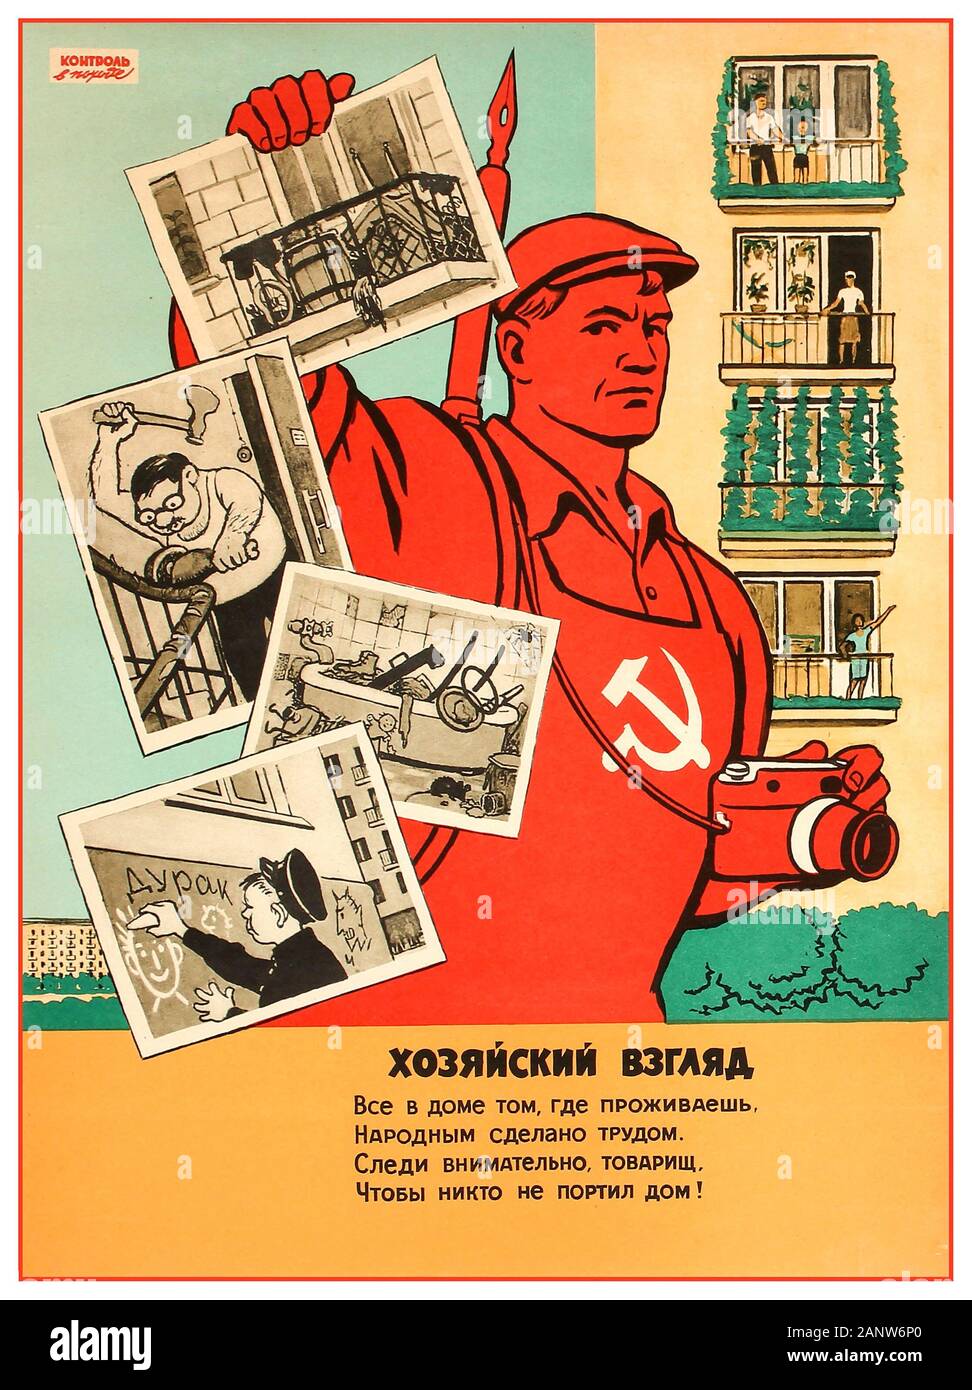 Vintage 1960’s Soviet Russian anti-social behaviour propaganda poster illustrating Soviet worker wearing red overalls with hammer and sickle, holding a camera in one hand and a series of black and white photographs in his other hand, depicting scenes of anti-social behaviour including storing rubbish and old furniture on a balcony, damaging the communal staircase, filling up and disposing of bad food in the communal bathroom and writing graffiti on public walls, contrasted with  happy people standing on their clean balconies with green plants Stock Photo